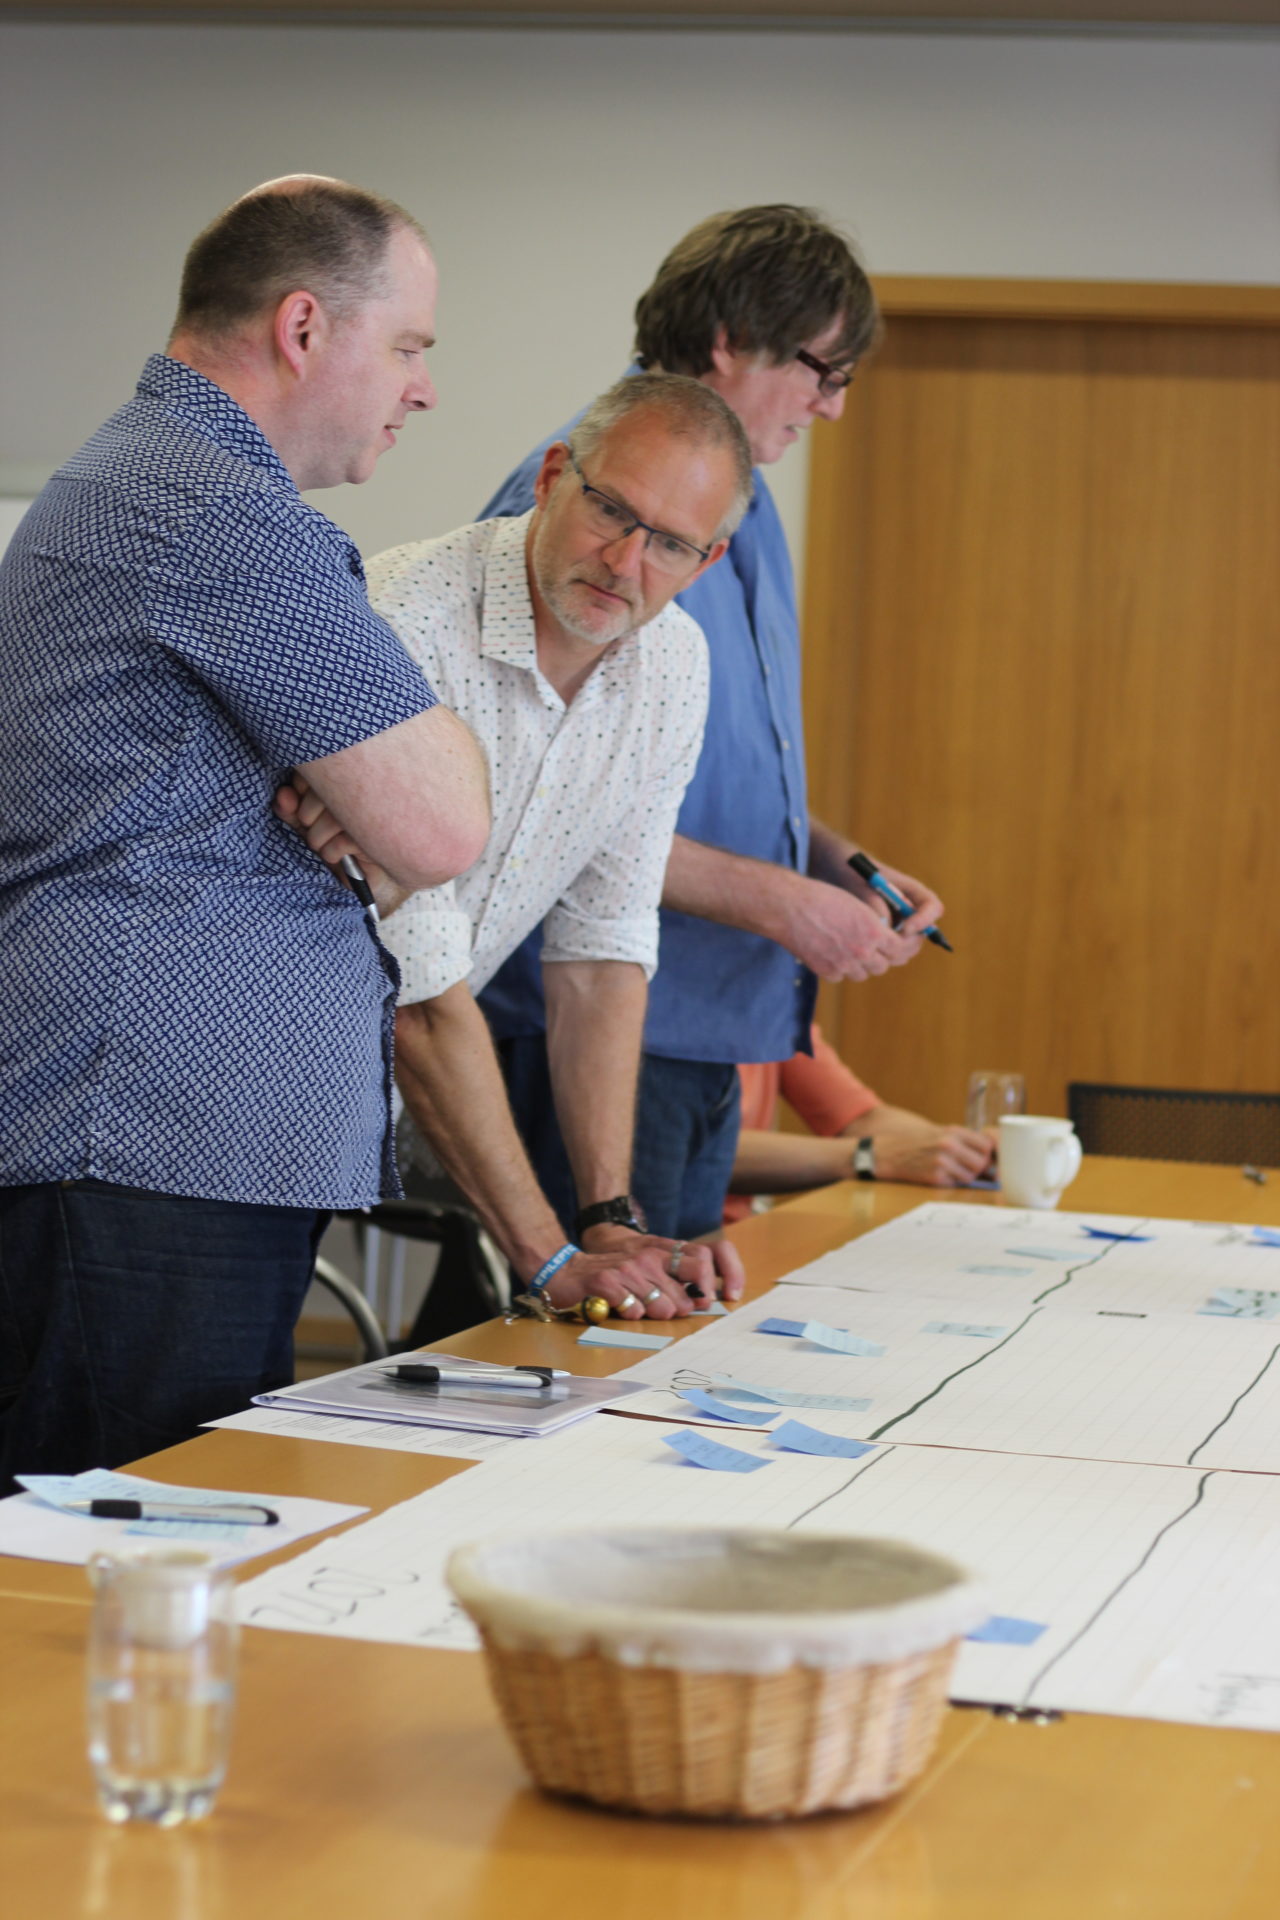 Ray Holt and Stuart Murray muse over the implications of the drawn timeline. They stand at a table looking at papers spread out on the table top (Tony Prescott in the background).